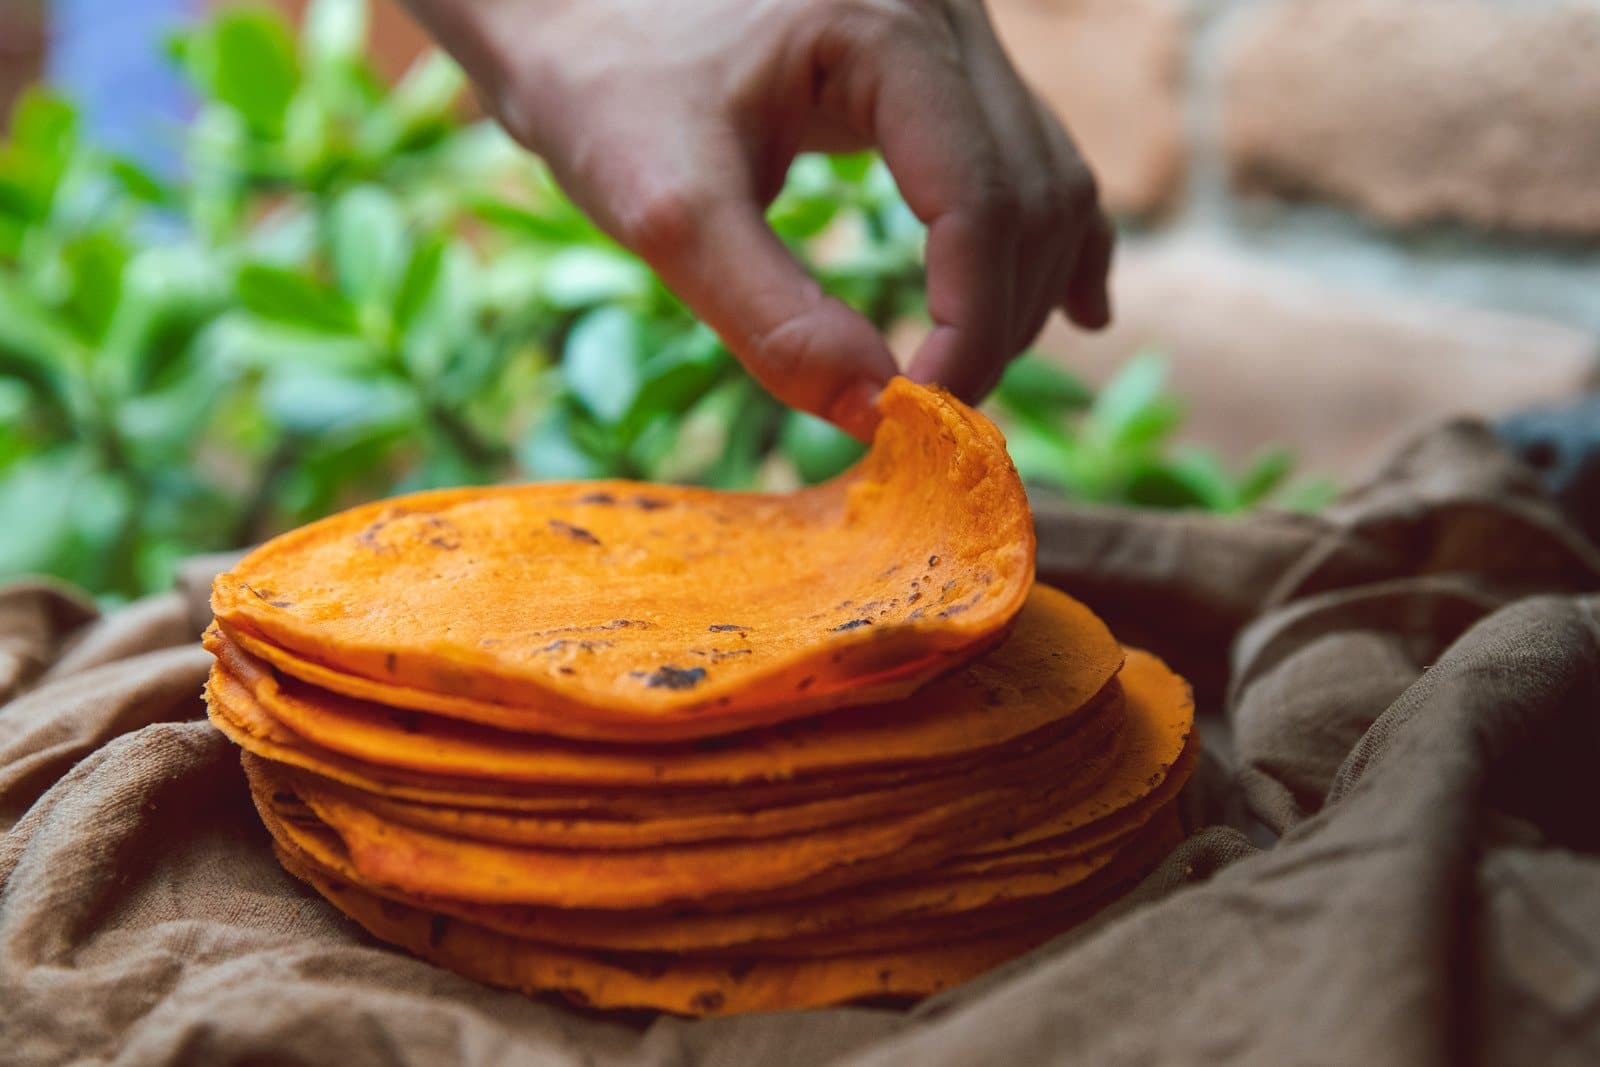 A person's hand picking up a slice from a stack of orange, crispy Hatch Red Chile Corn Tortillas on a cloth, with vibrant green plants softly blurred in the background.